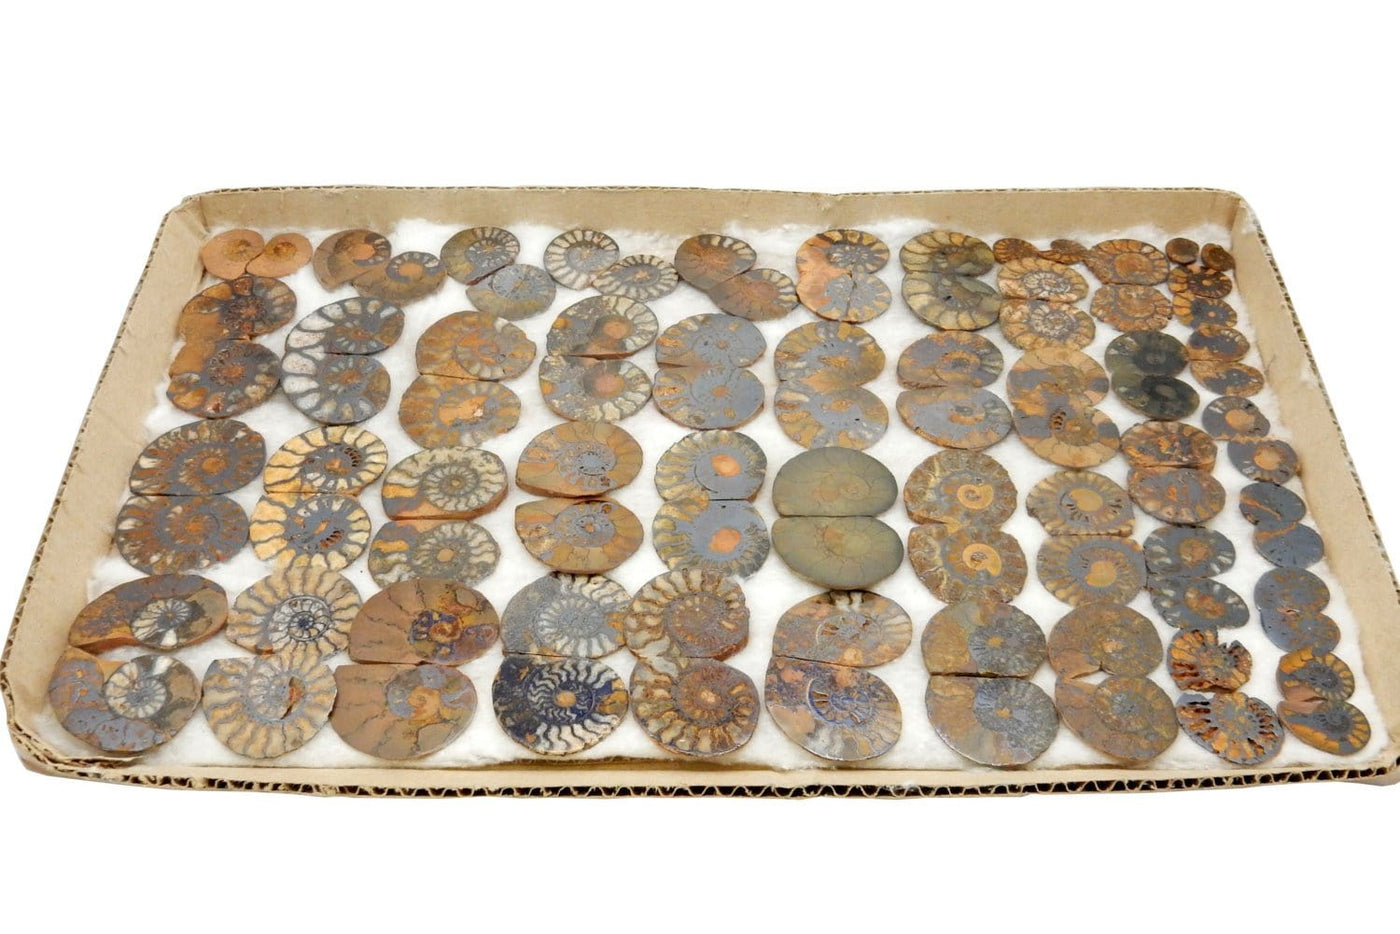 A tray full of Ammonite fossil pairs.